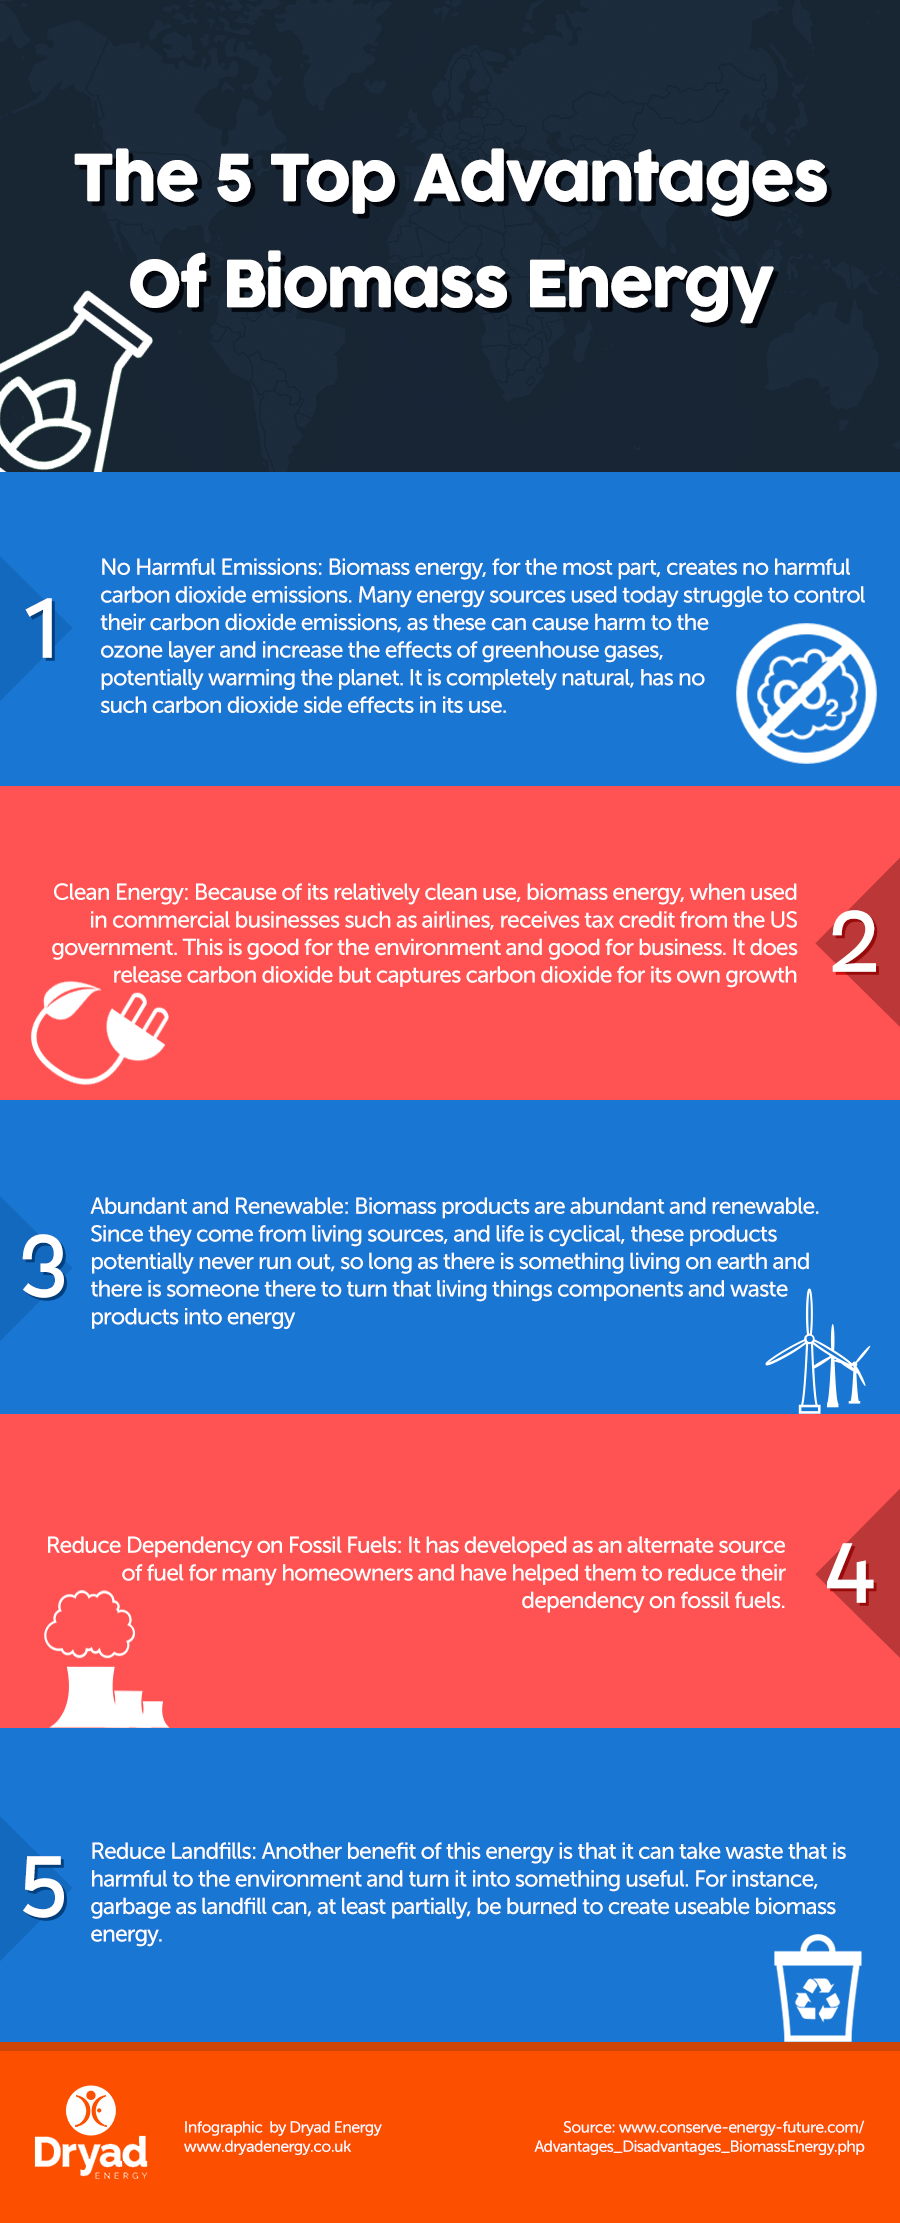 The 5 Top Advantages Of Biomass Energy